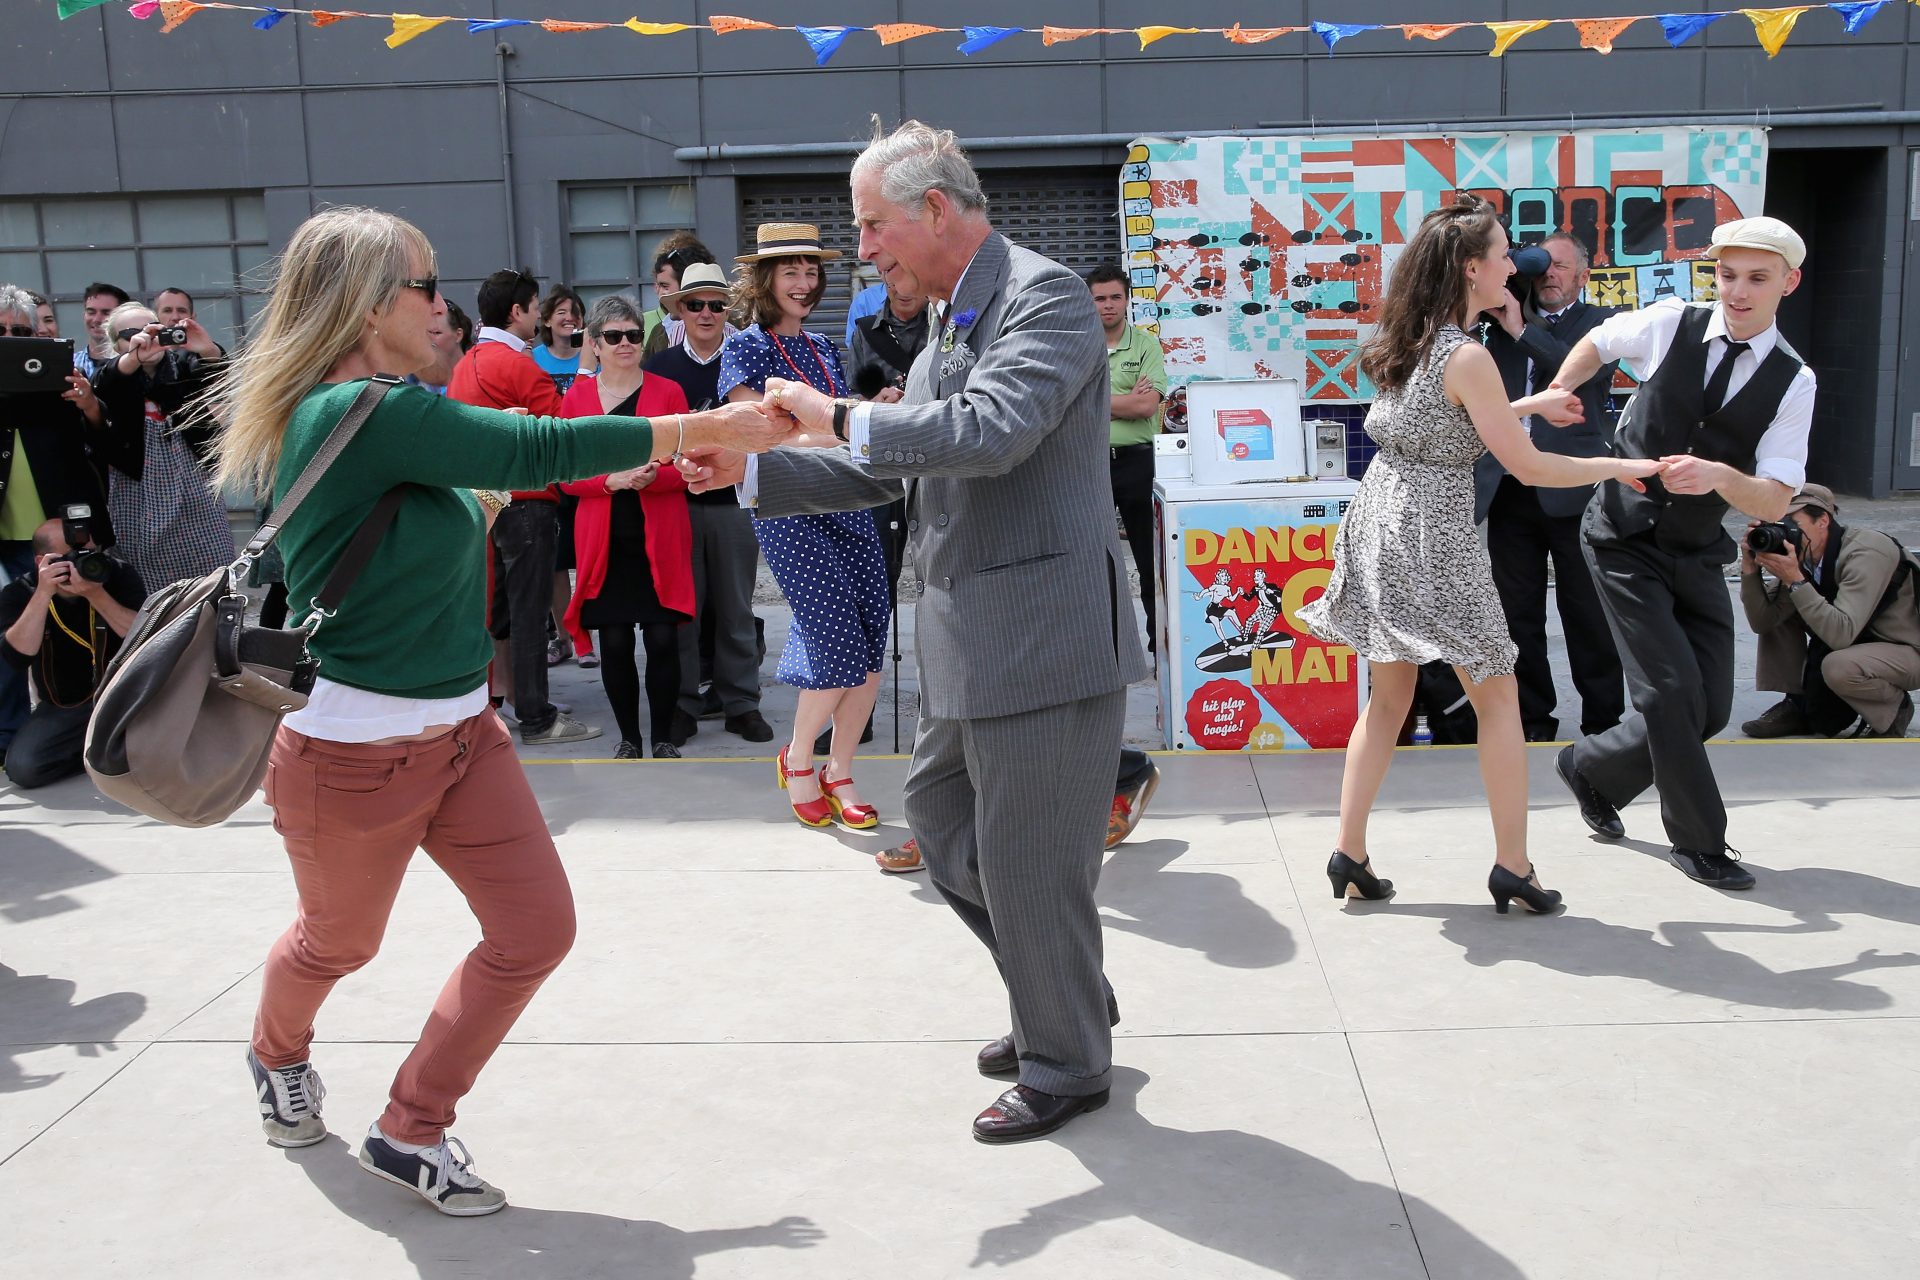 <p>Cultural events are a much-loved part of the tour. In 2012, local Lisa Shannon persuaded the future King Charles to dance at the rock 'n' roll event in Christchurch.</p>